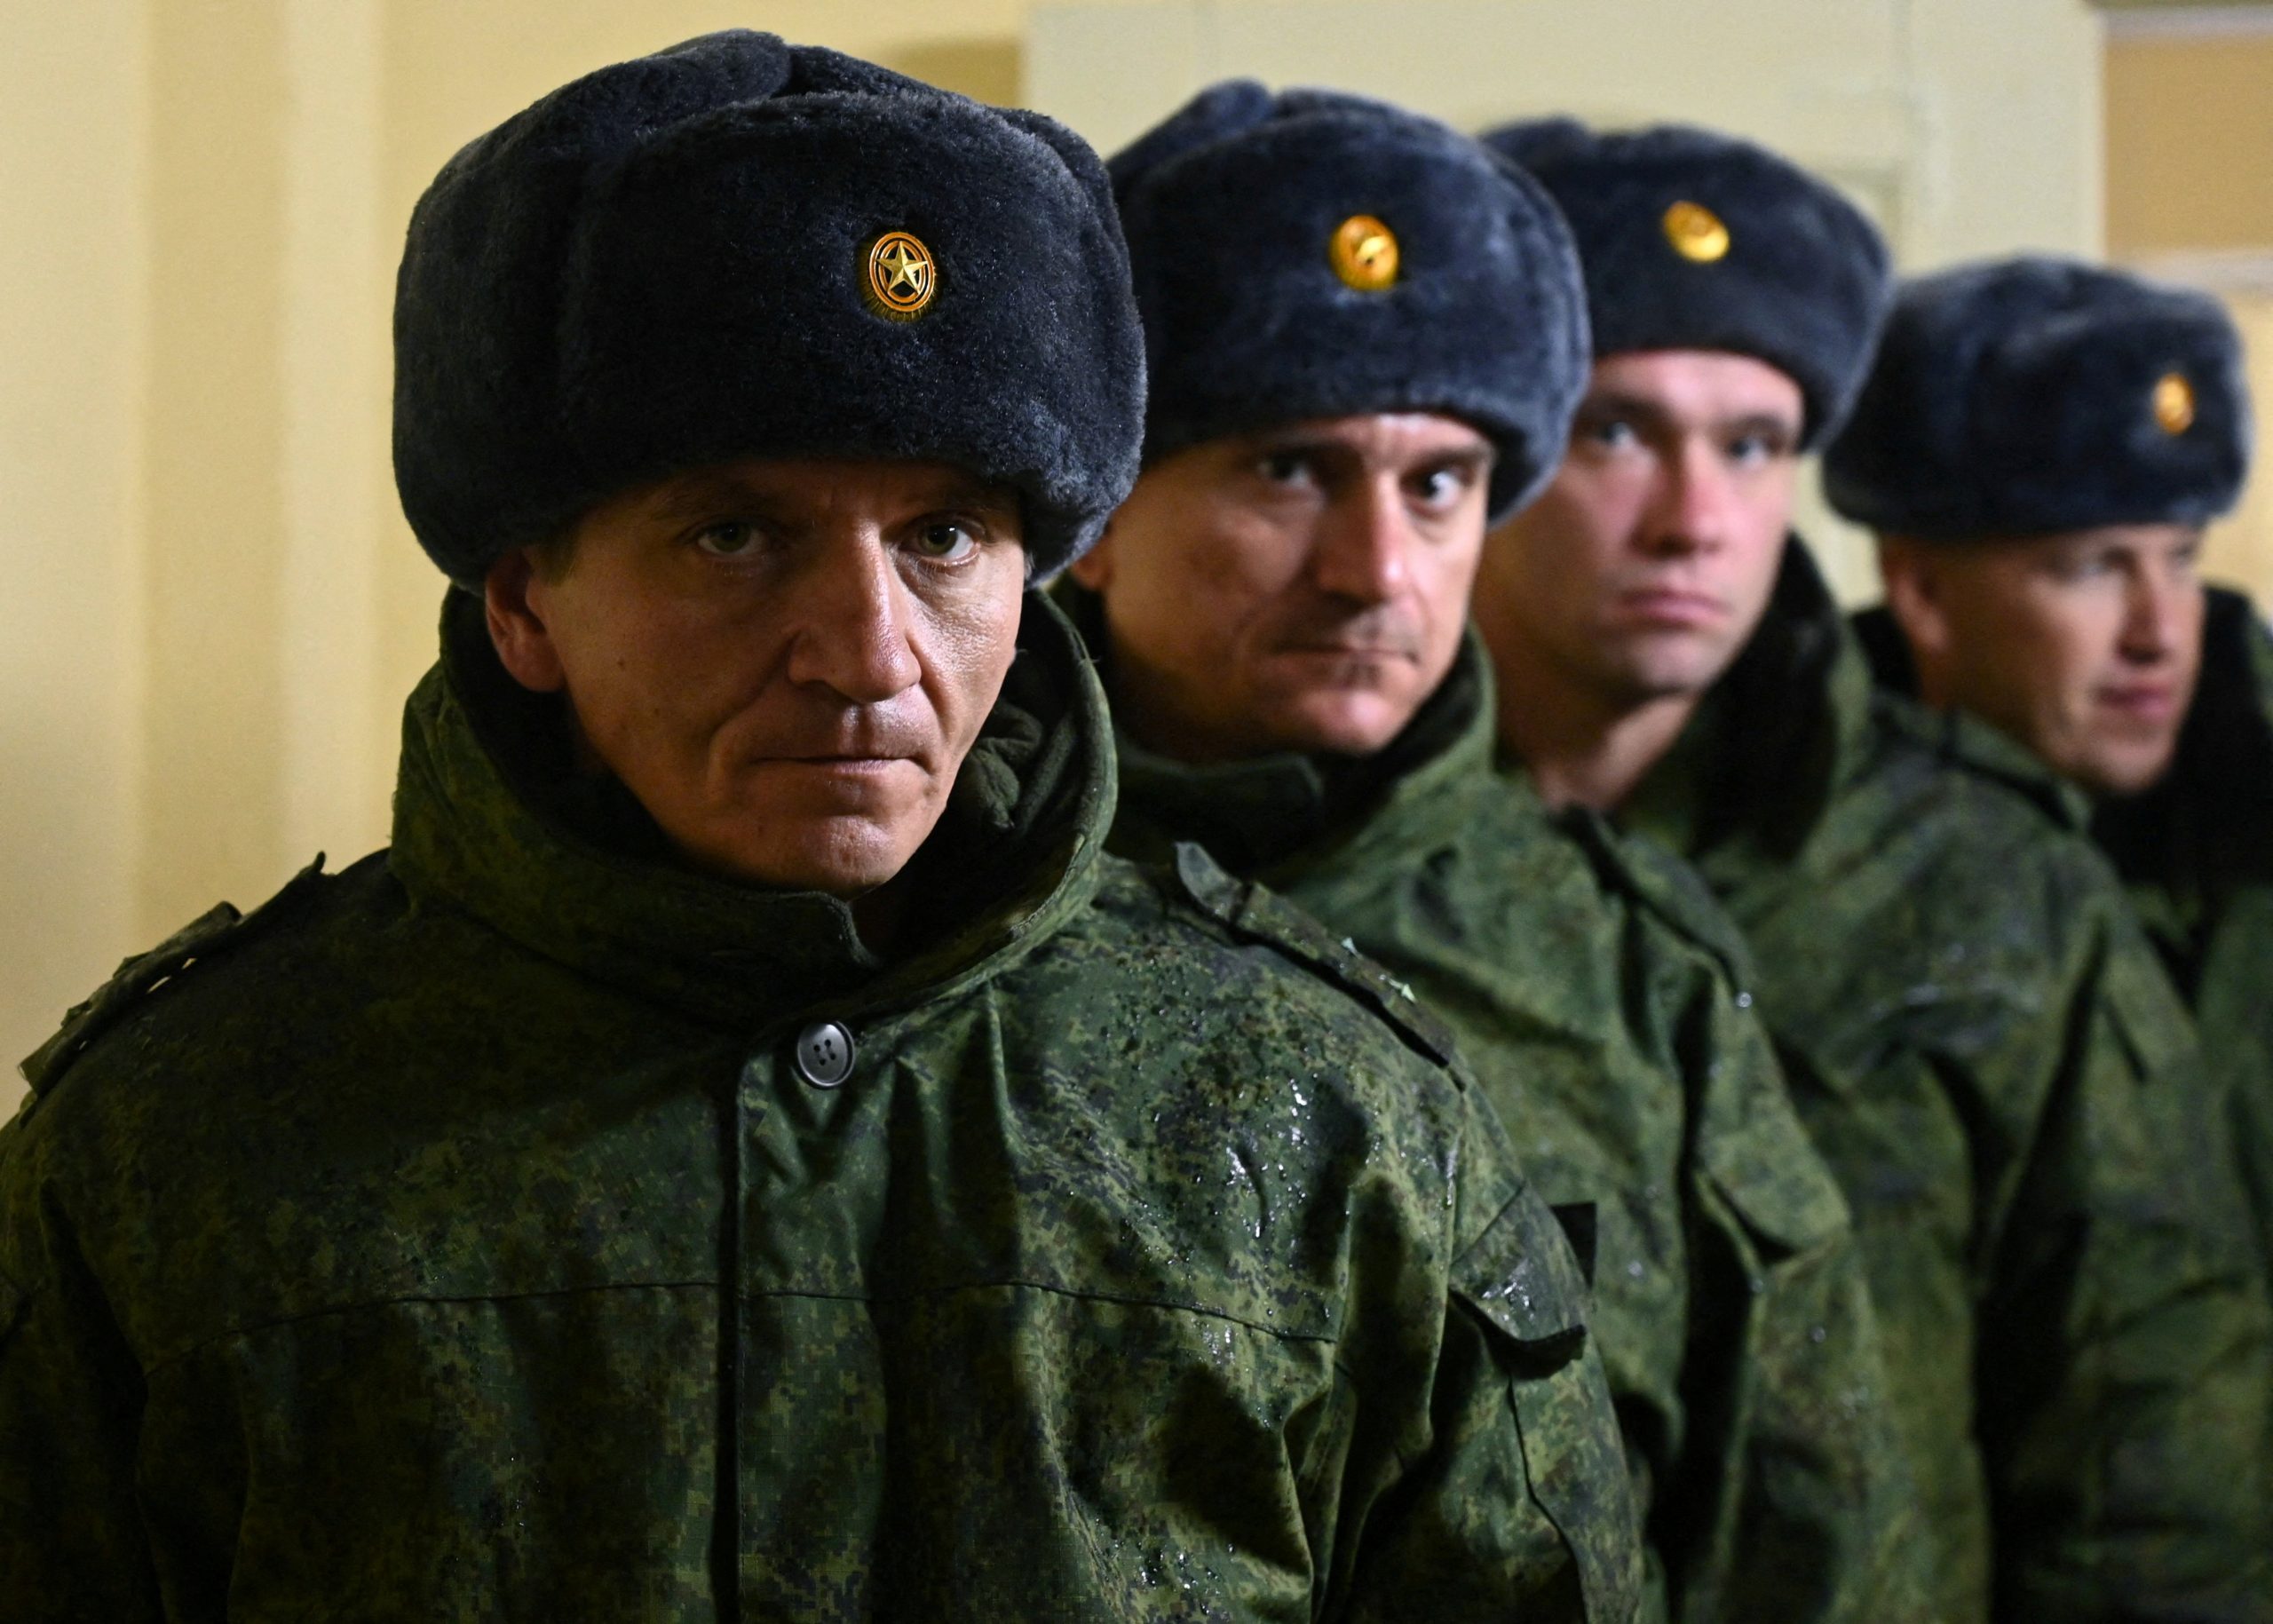 Photo: Russian reservists recruited during the partial mobilisation of troops line up as they receive gear before departing to the zone of Russia-Ukraine conflict, in the Rostov region, Russia October 31, 2022. Credit: REUTERS/Sergey Pivovarov